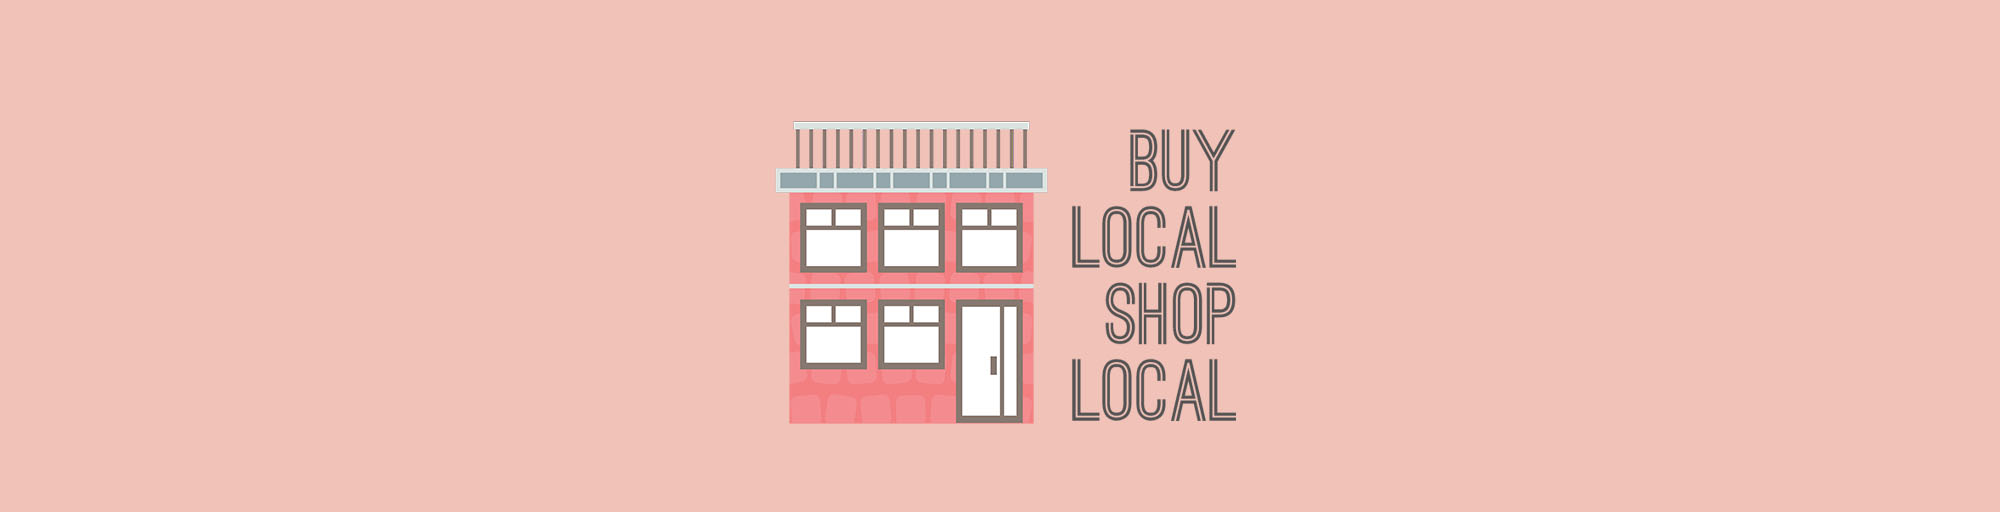 buy local shop local janome dealer